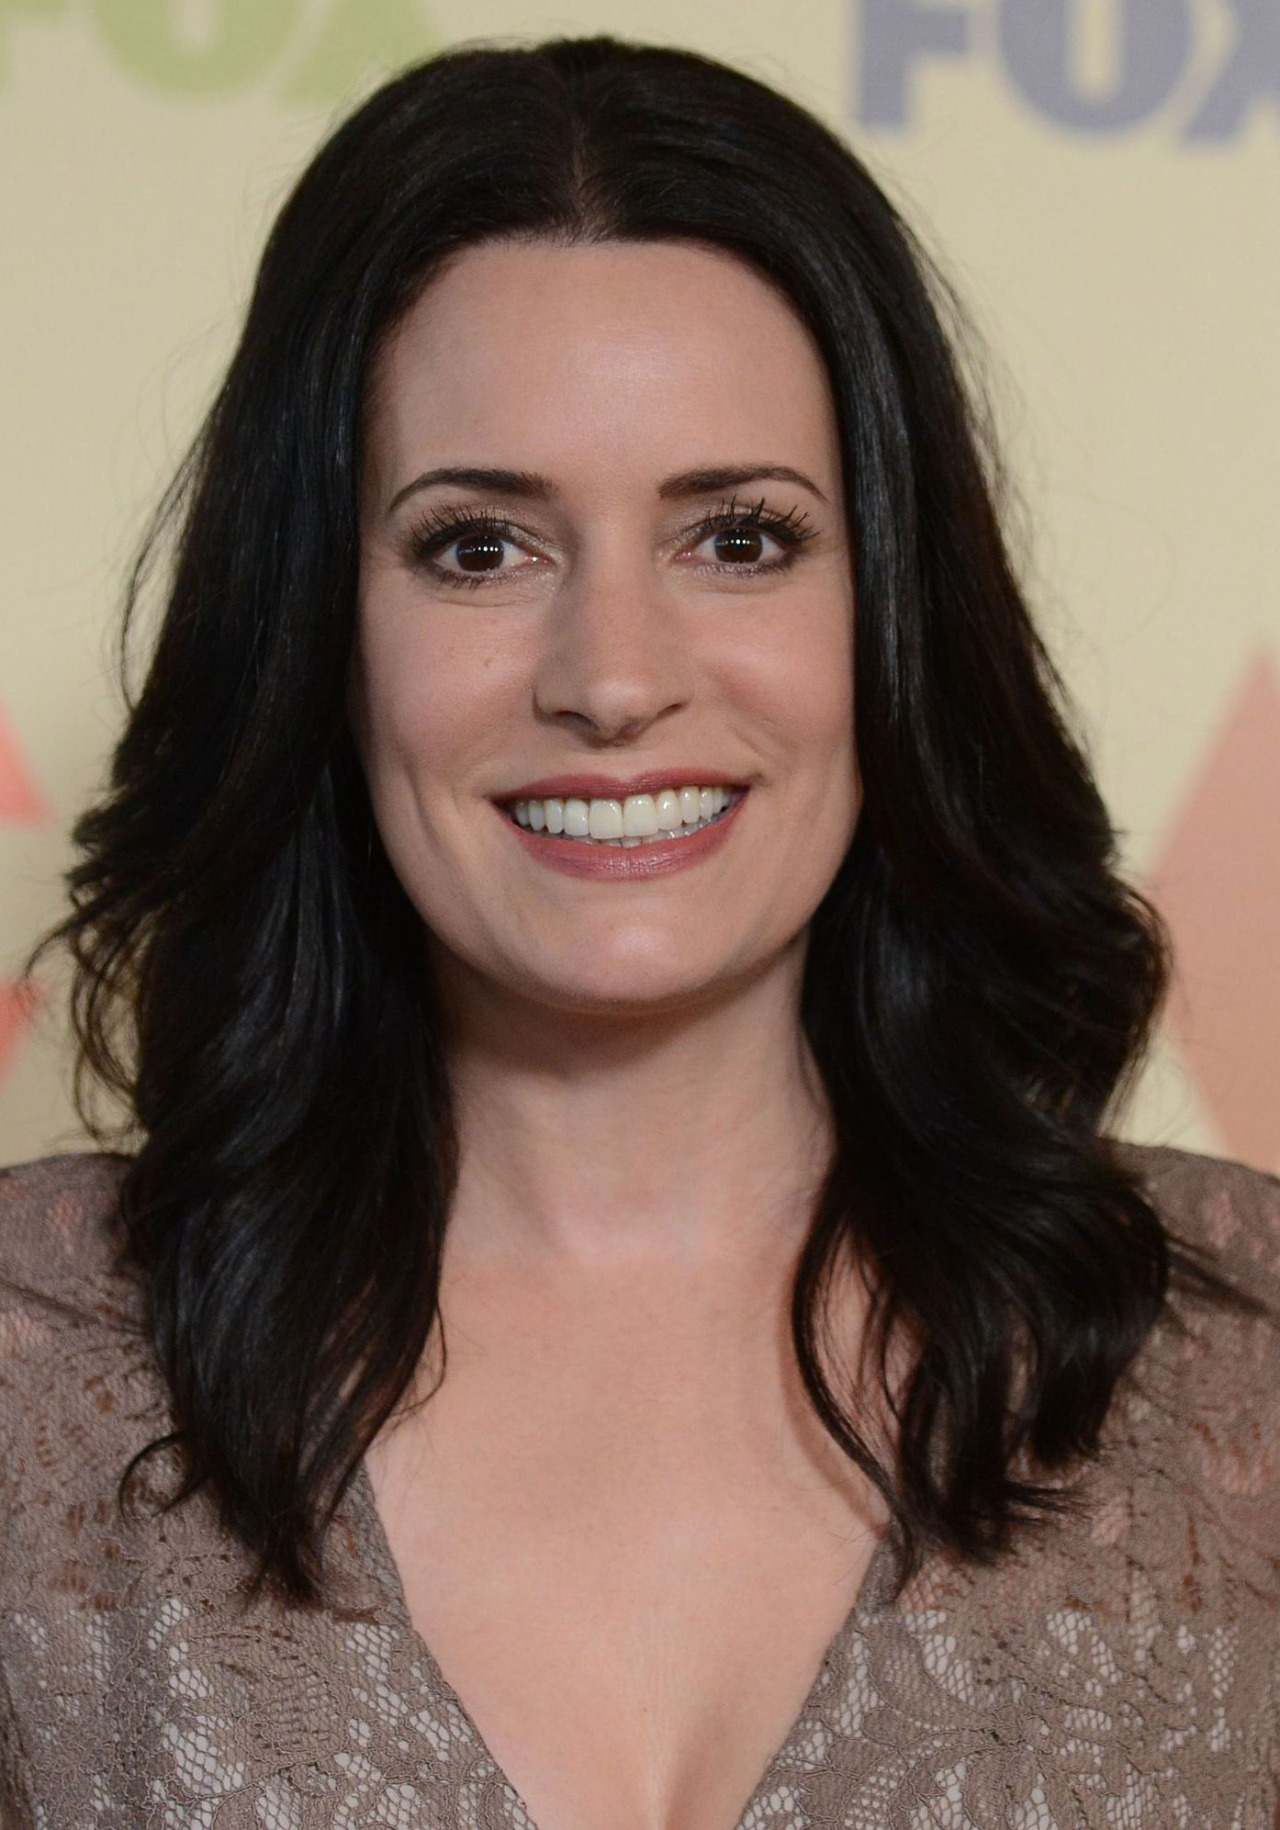 Paget Brewster Images on Fanpop.